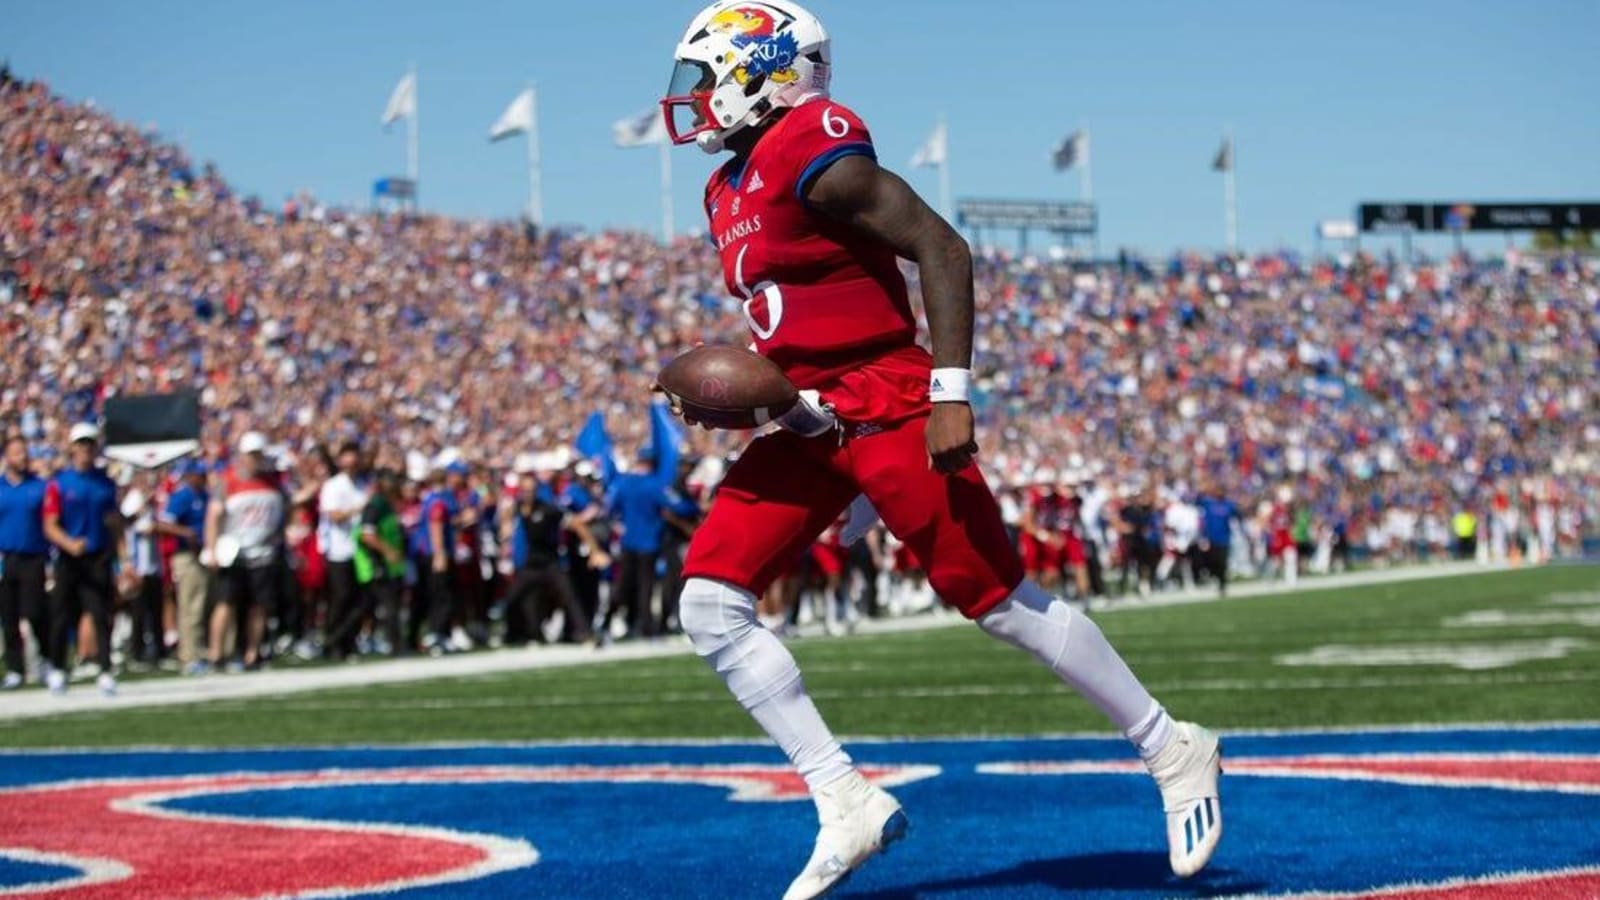 Kansas vs. Iowa State, prediction, pick, odds: Jayhawks put potent offense up against Cyclones